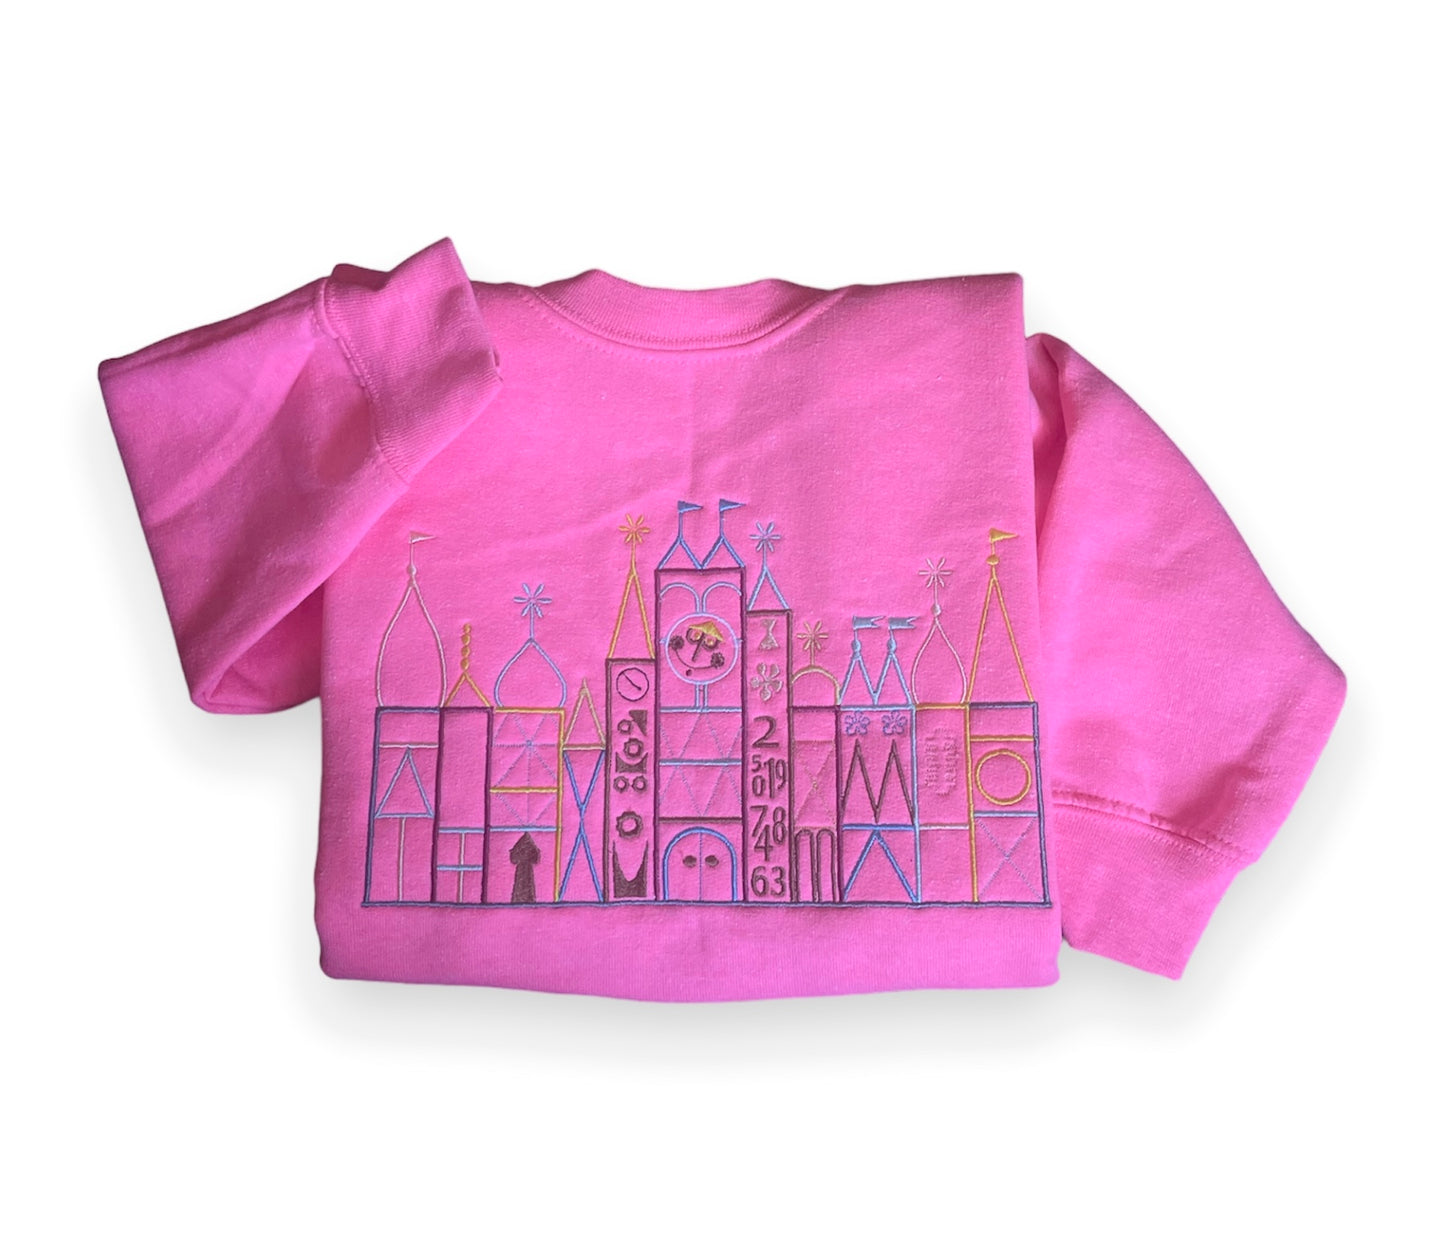 Youth Sweatshirt with Embroidered World of Wonders Design